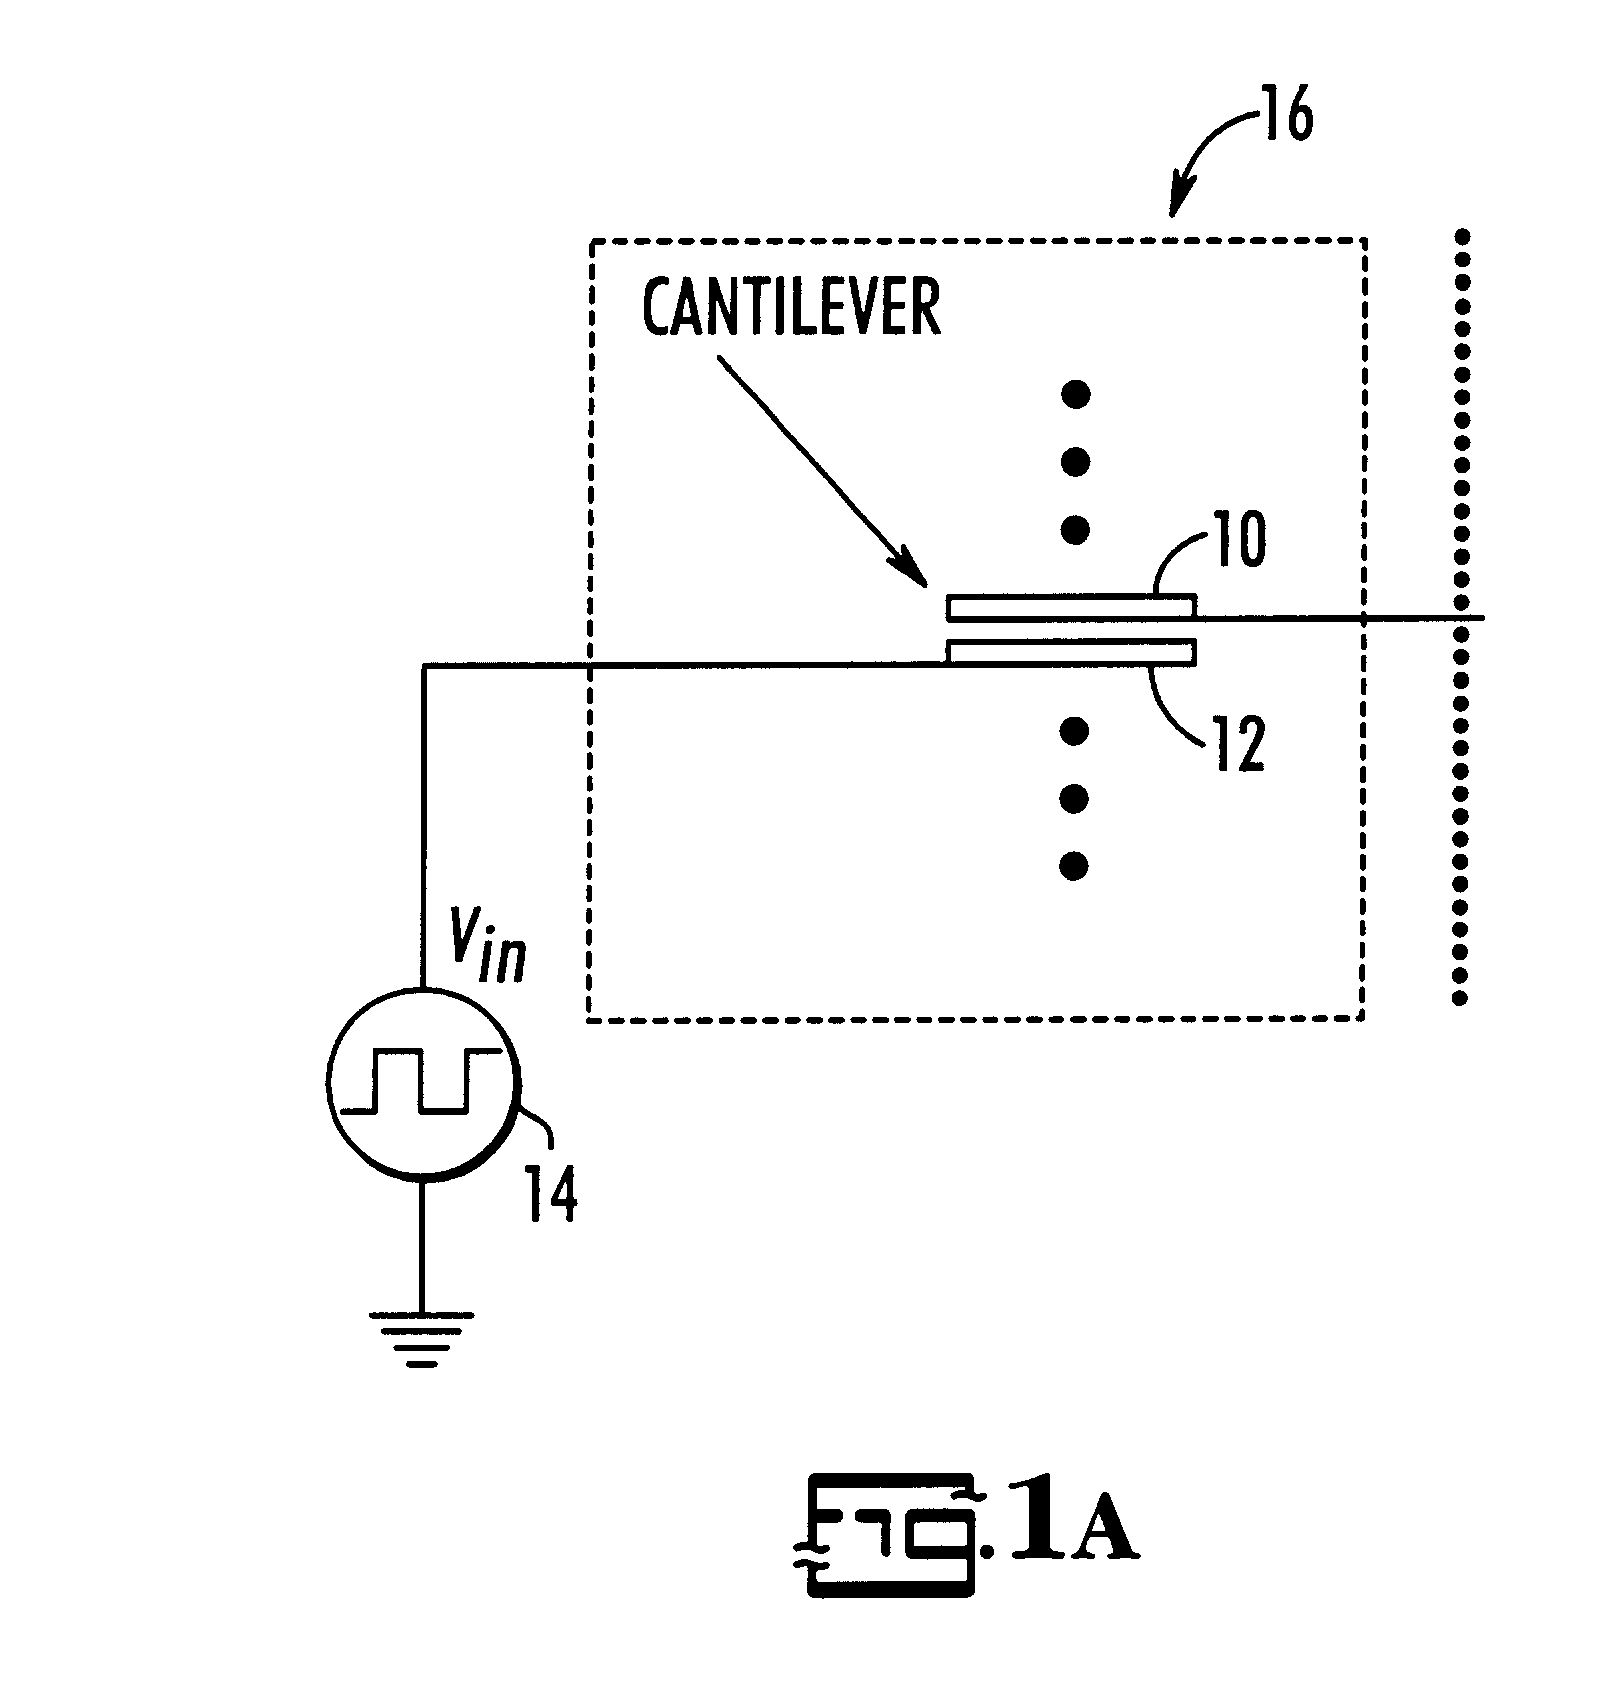 Capacitively readout multi-element sensor array with common-mode cancellation